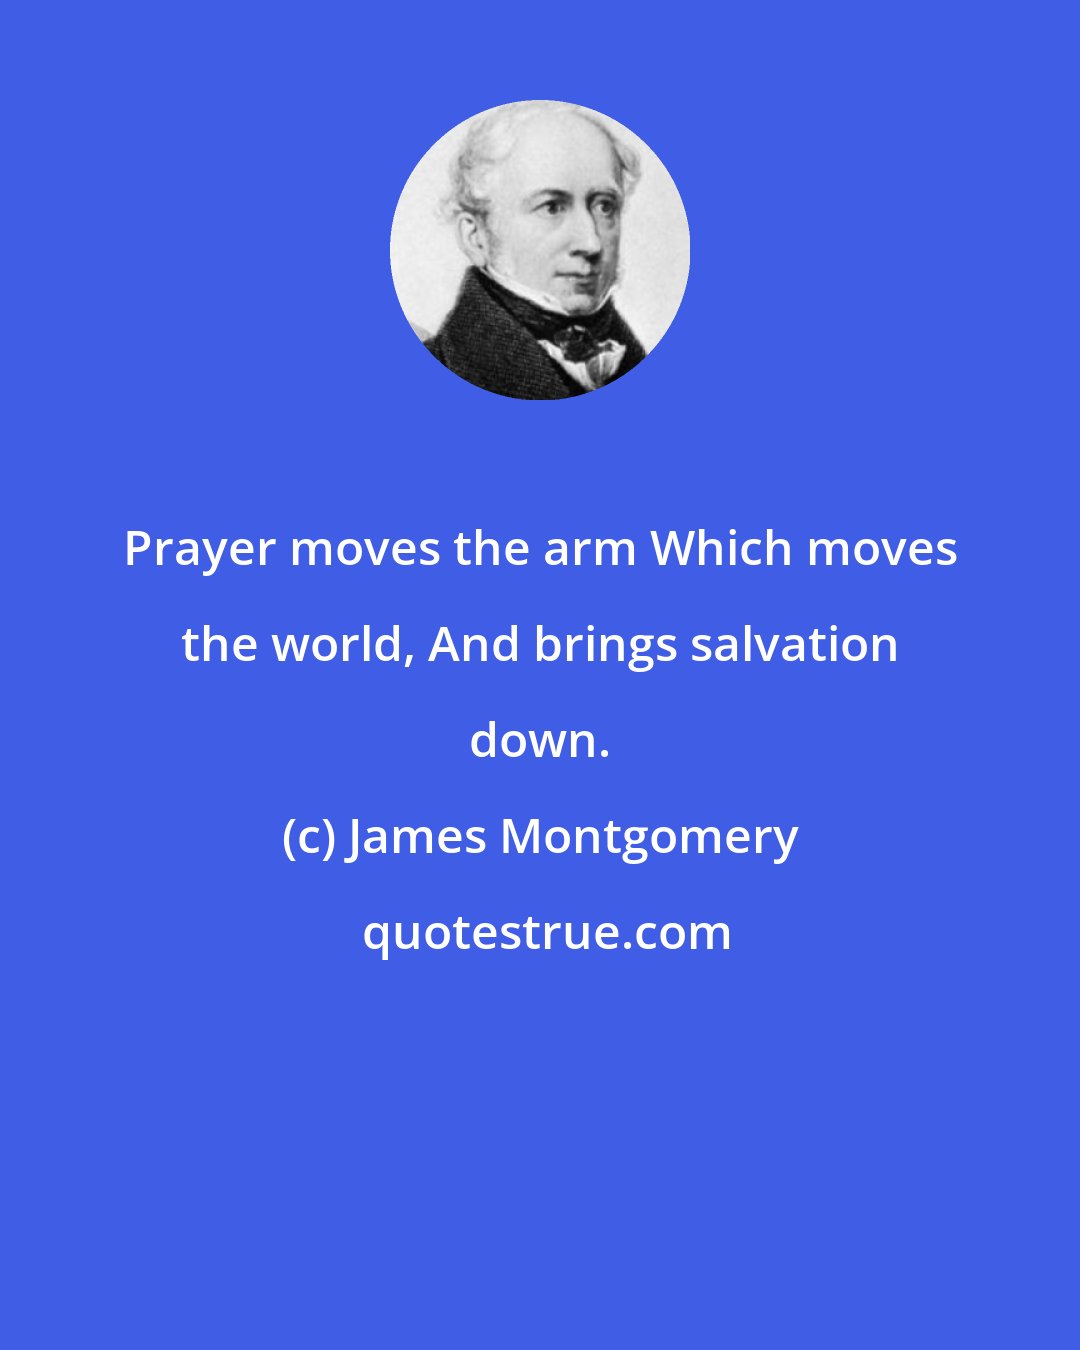 James Montgomery: Prayer moves the arm Which moves the world, And brings salvation down.